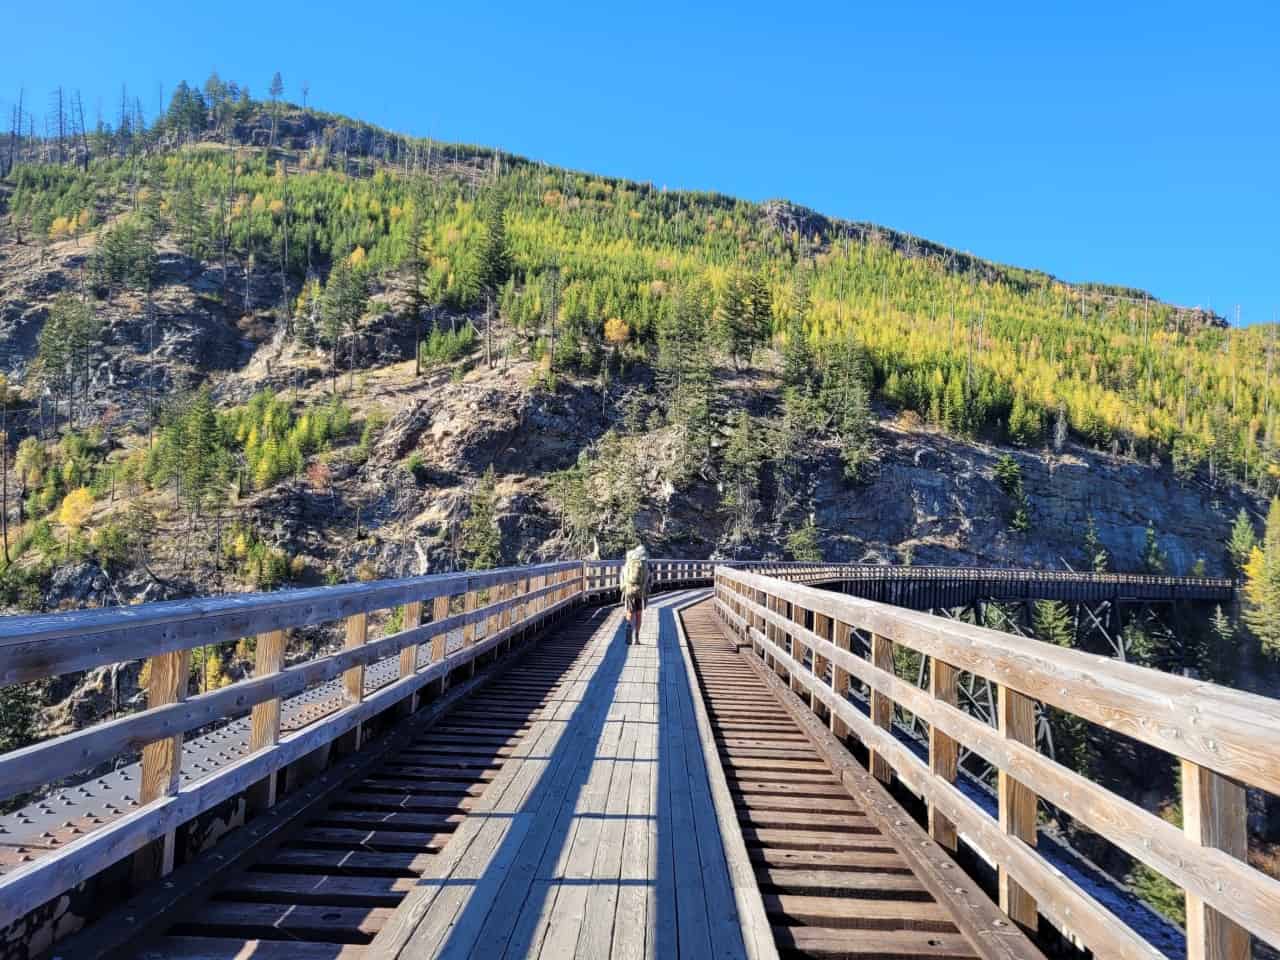 Myra Canyon is a scenic highlight of the KVR - The Myra Canyon Trestles are one of the most scenic and exciting portions of British Columbia's famous #kettlevalleyrailtrail (KVR).